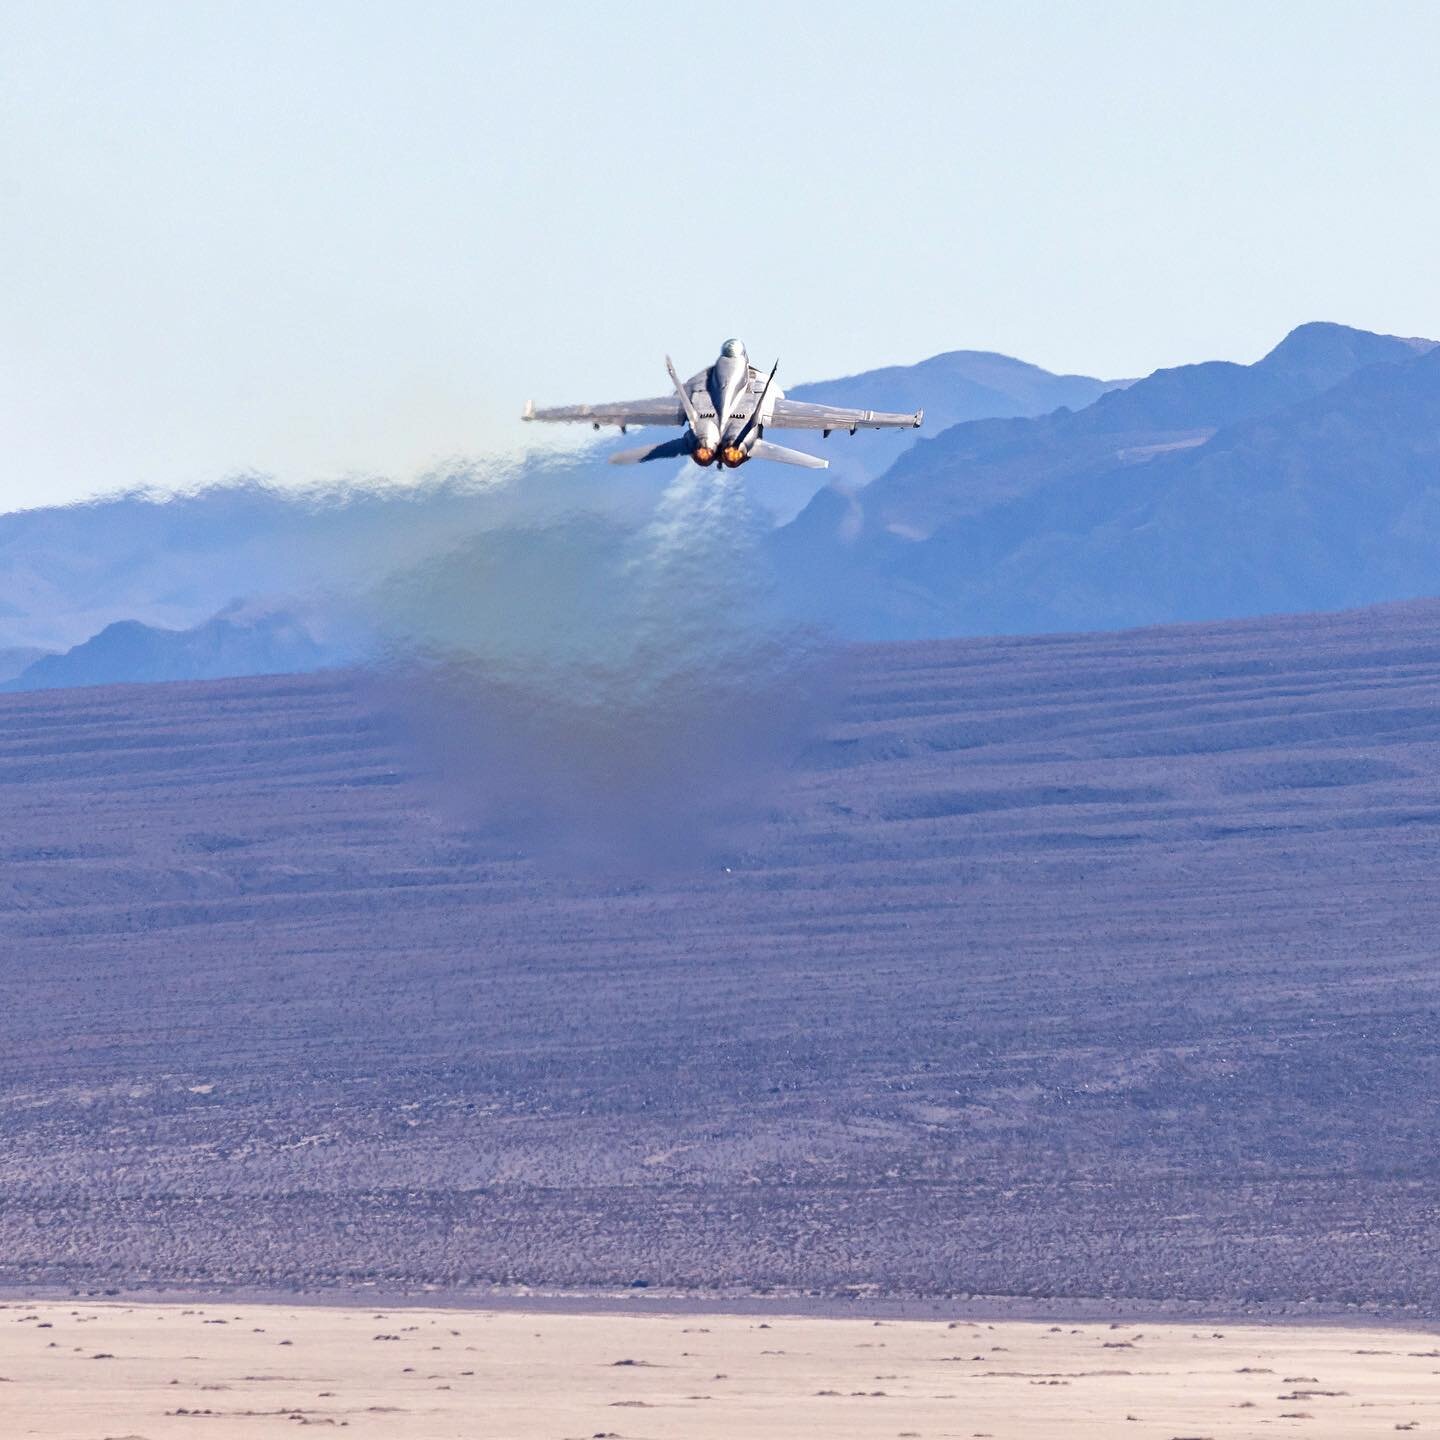 Up and Out #F18 #full_afterburner #sidewinderlowlevel #heatdistortion